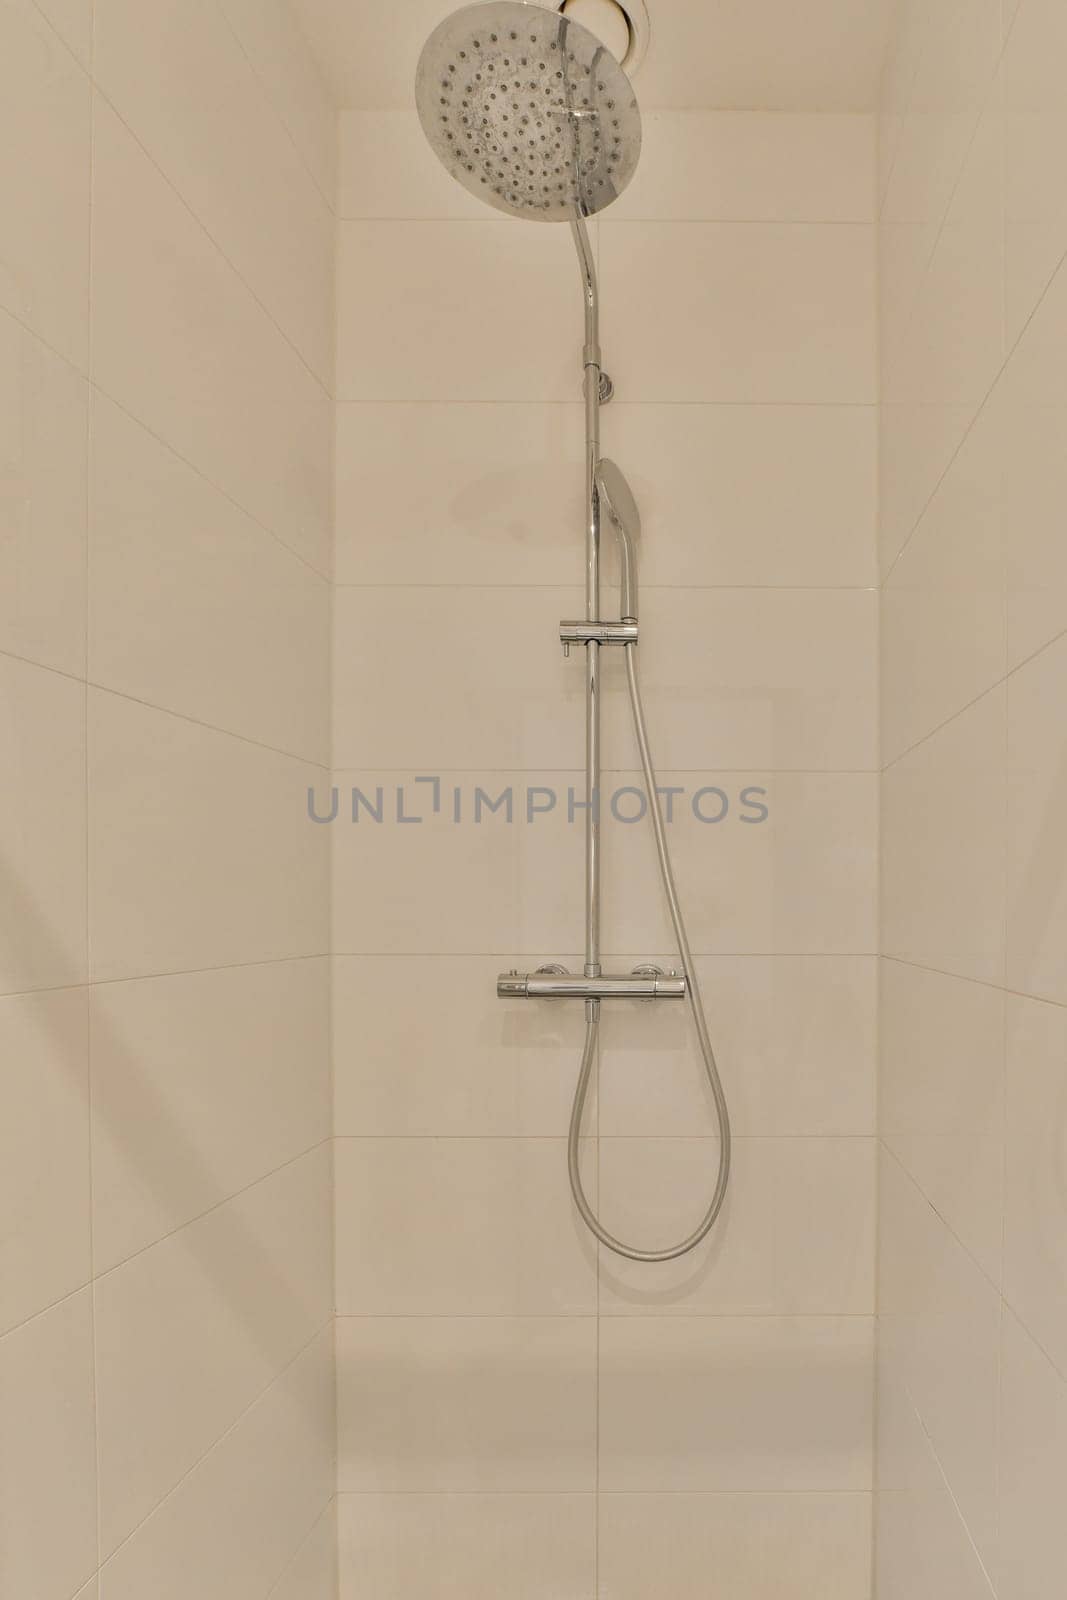 a shower that is very clean and ready for you to use in the bathroom or on the other side of the wall